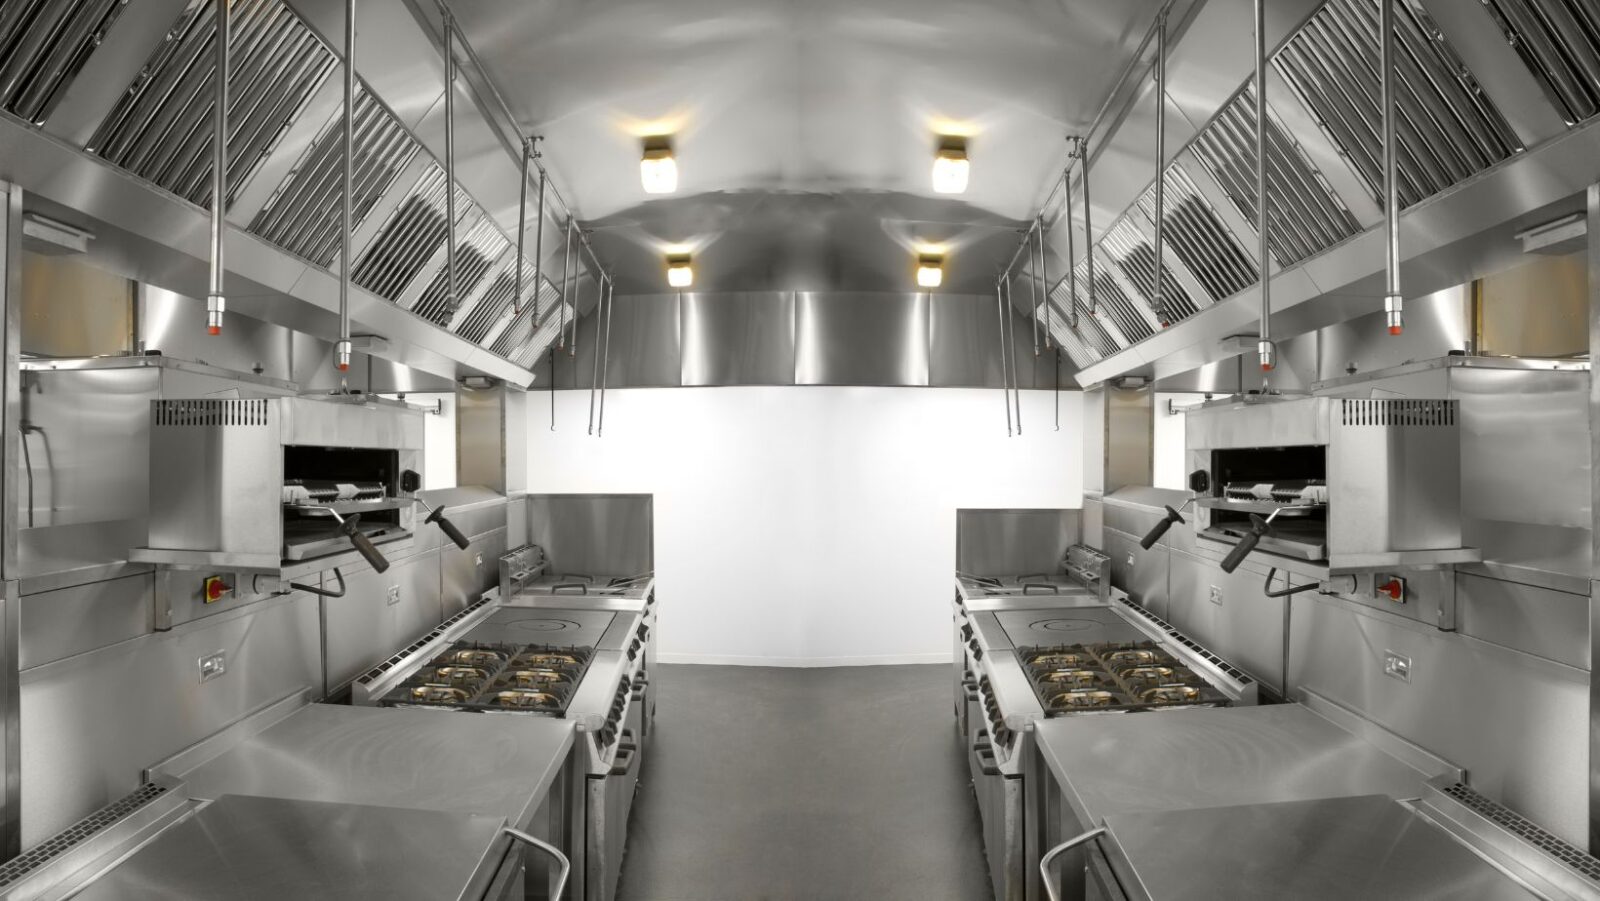 Read more about the article Challenges with Unsustainable Materials and Non-Eco-Friendly Practices in Commercial Kitchens